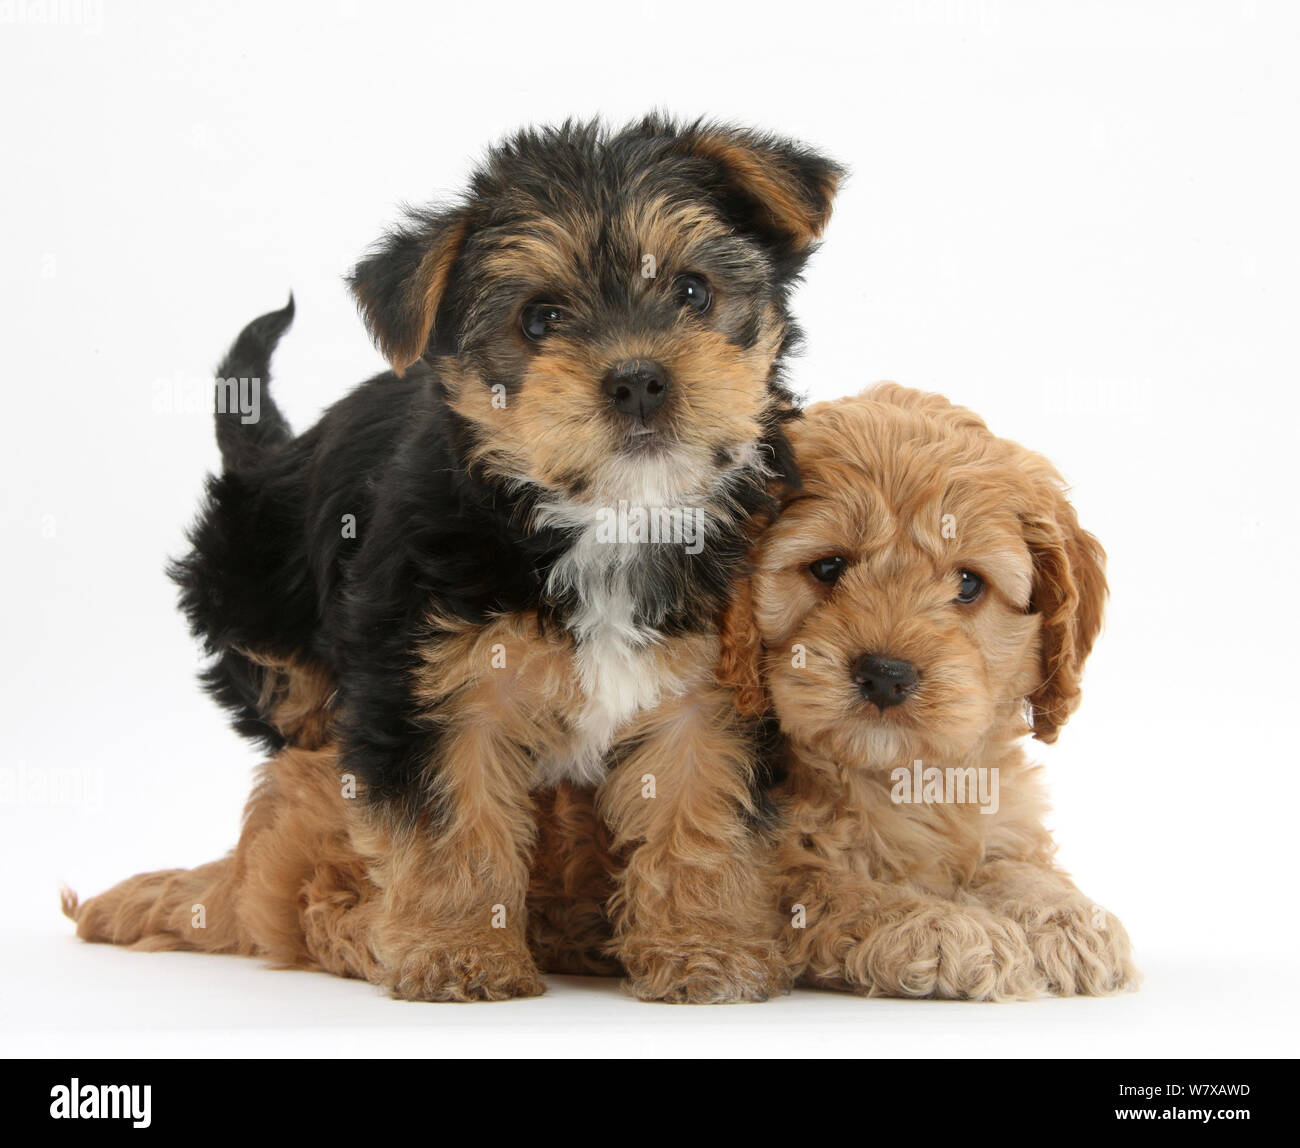 Cavalier King Charles spaniel x Poodle cross 'Cavapoo' puppy, age 7 weeks, and Yorkshire Terrier pup age 8 weeks. Stock Photo